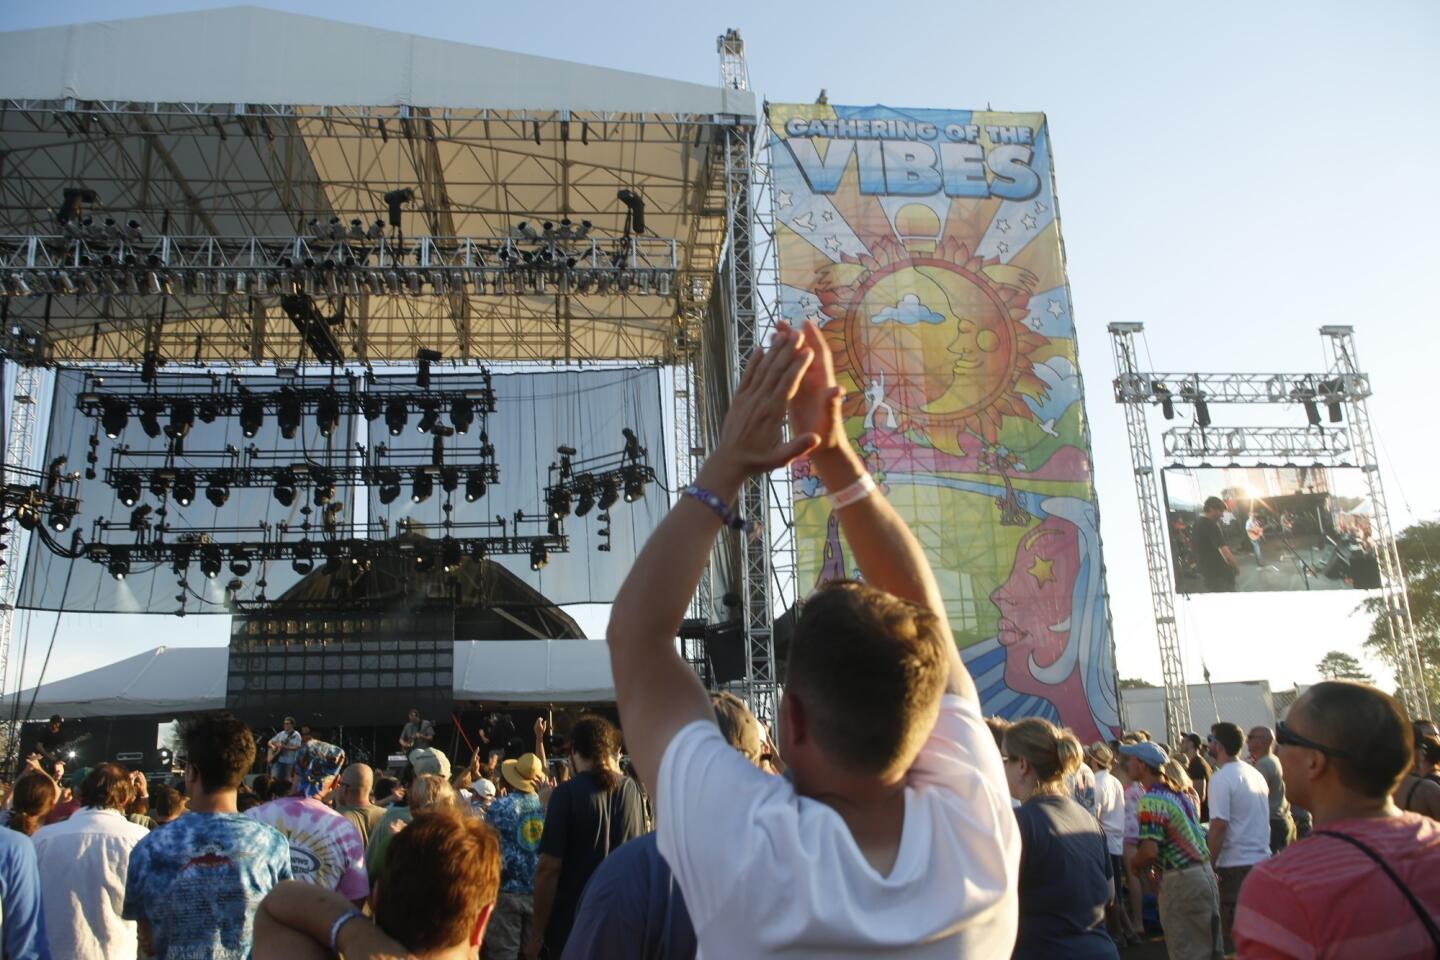 Connecticut's biggest festival, Gathering of the Vibes, returns to Seaside Park in Bridgeport in July. The 2013 lineup has yet to be announced. Past events have included acts such as Primus, Jane's Addiction and Elvis Costello so you can get an idea for what to expect once the names are unveiled.